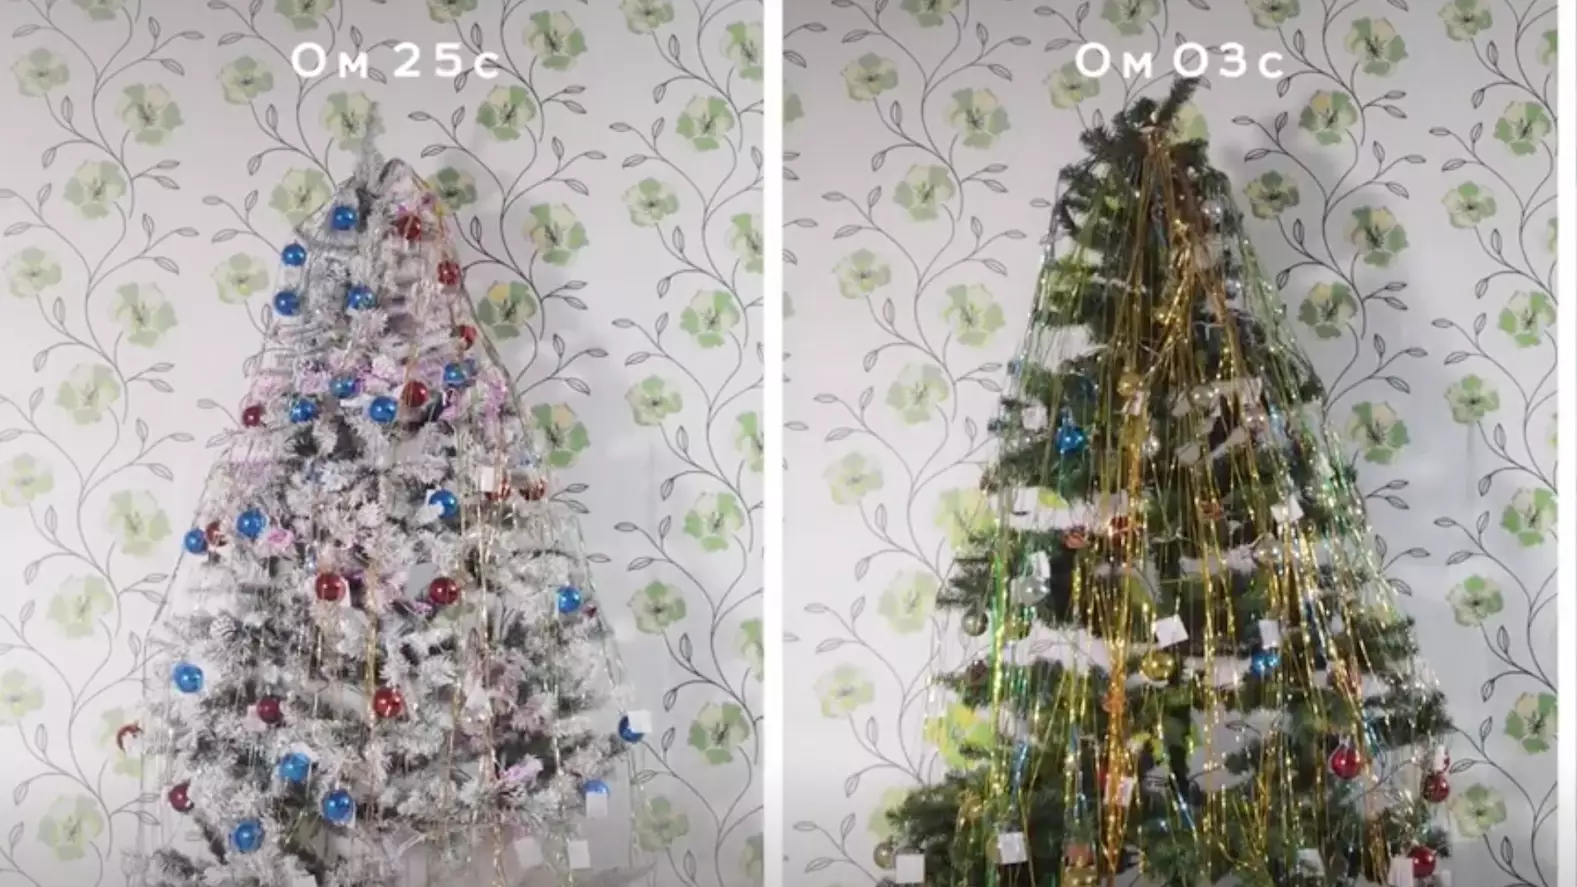 Firefighters Share Video Warning About Dangers Of 'Cheap' Artificial Christmas Trees